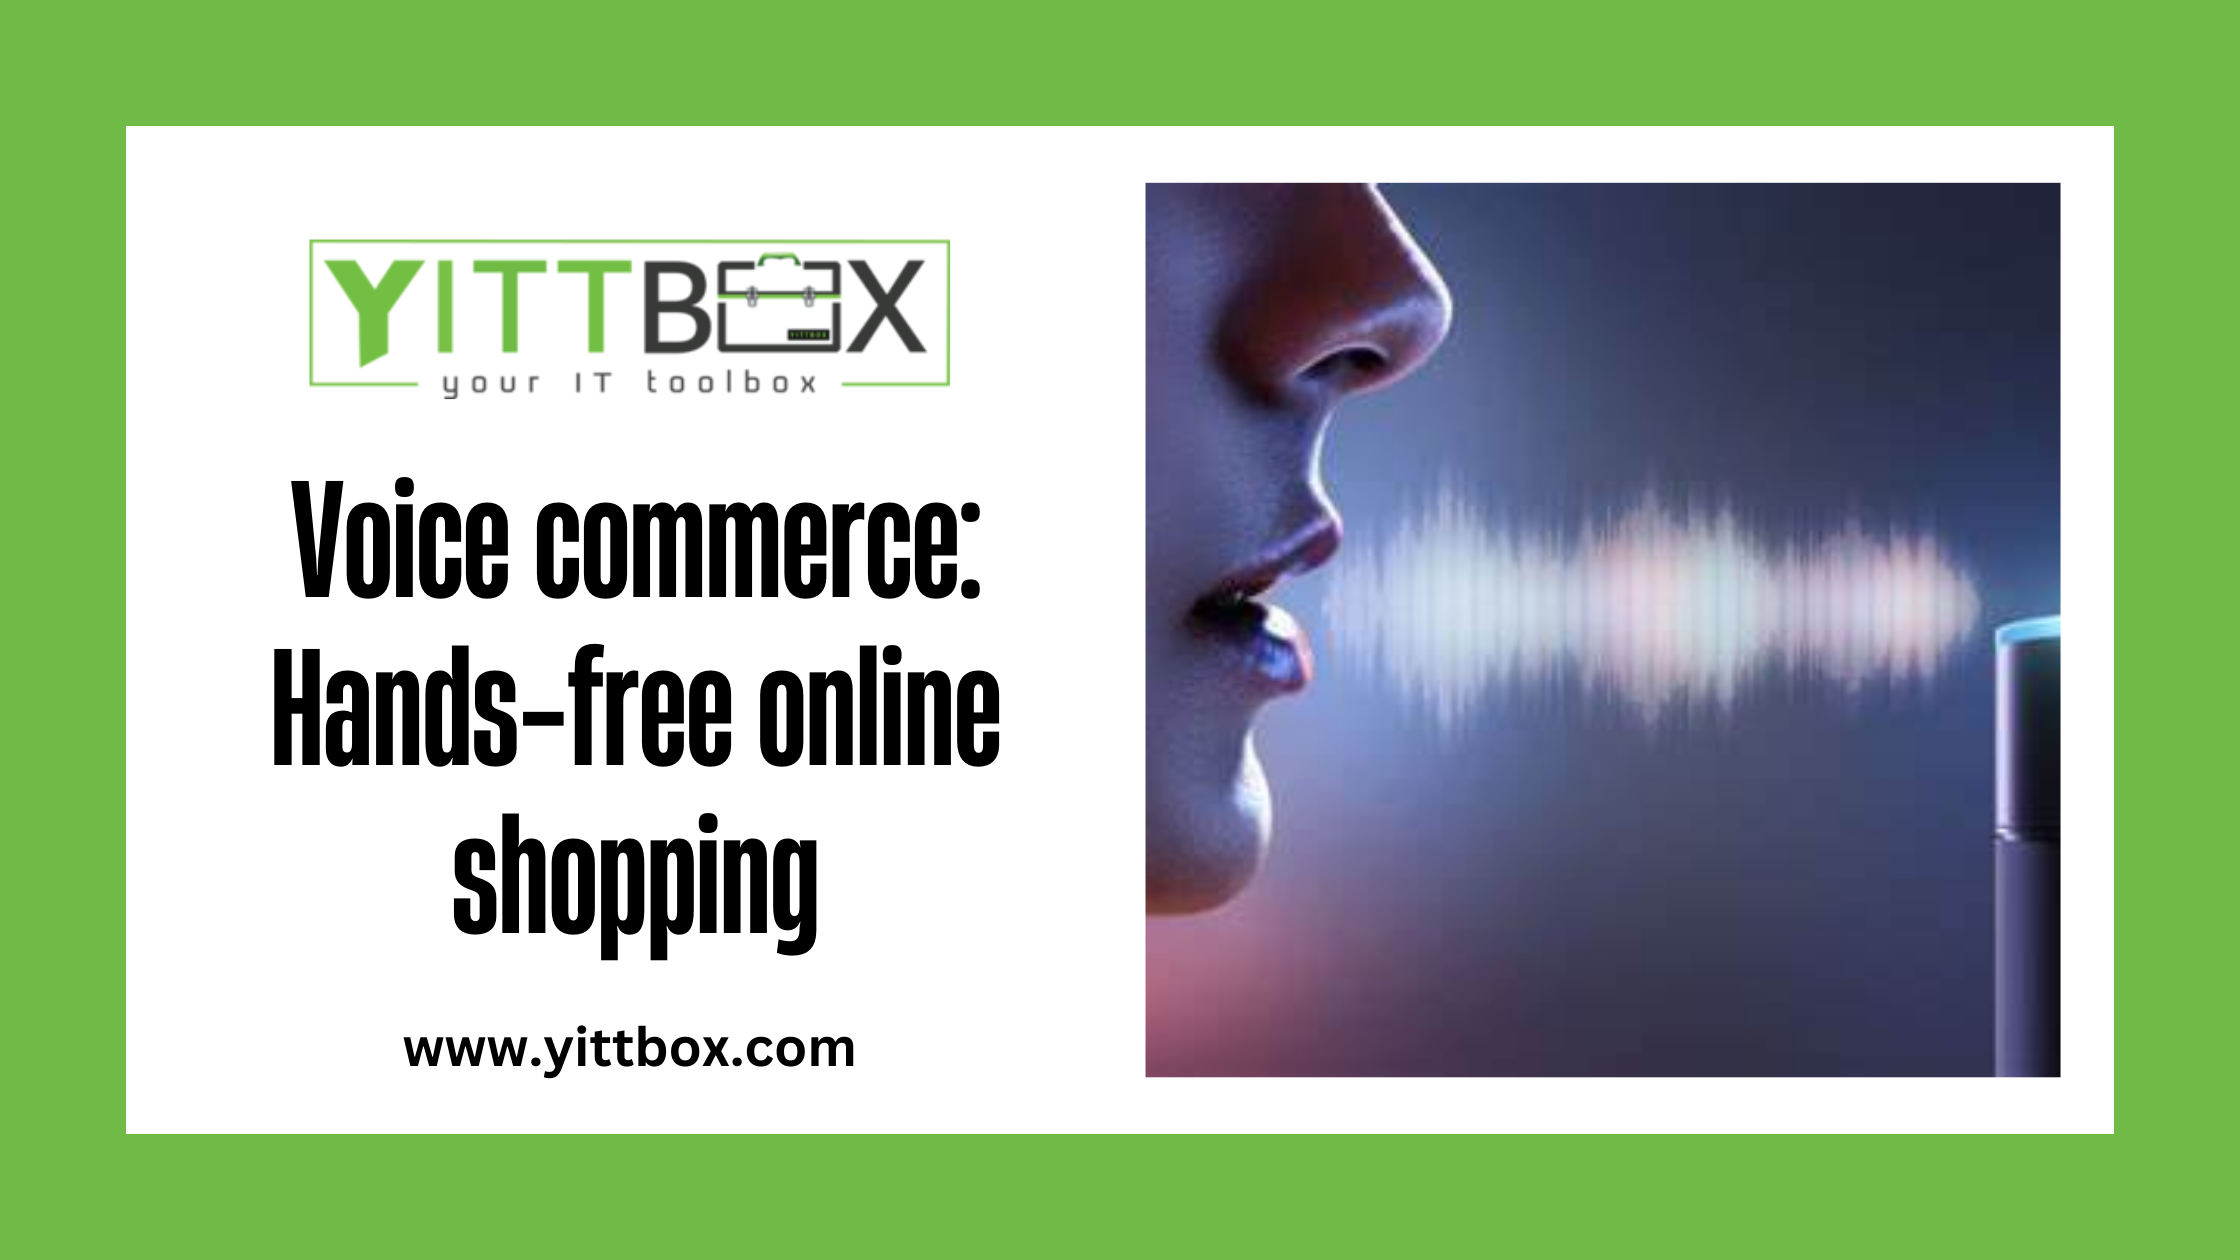 Voice commerce: hands-free online shopping